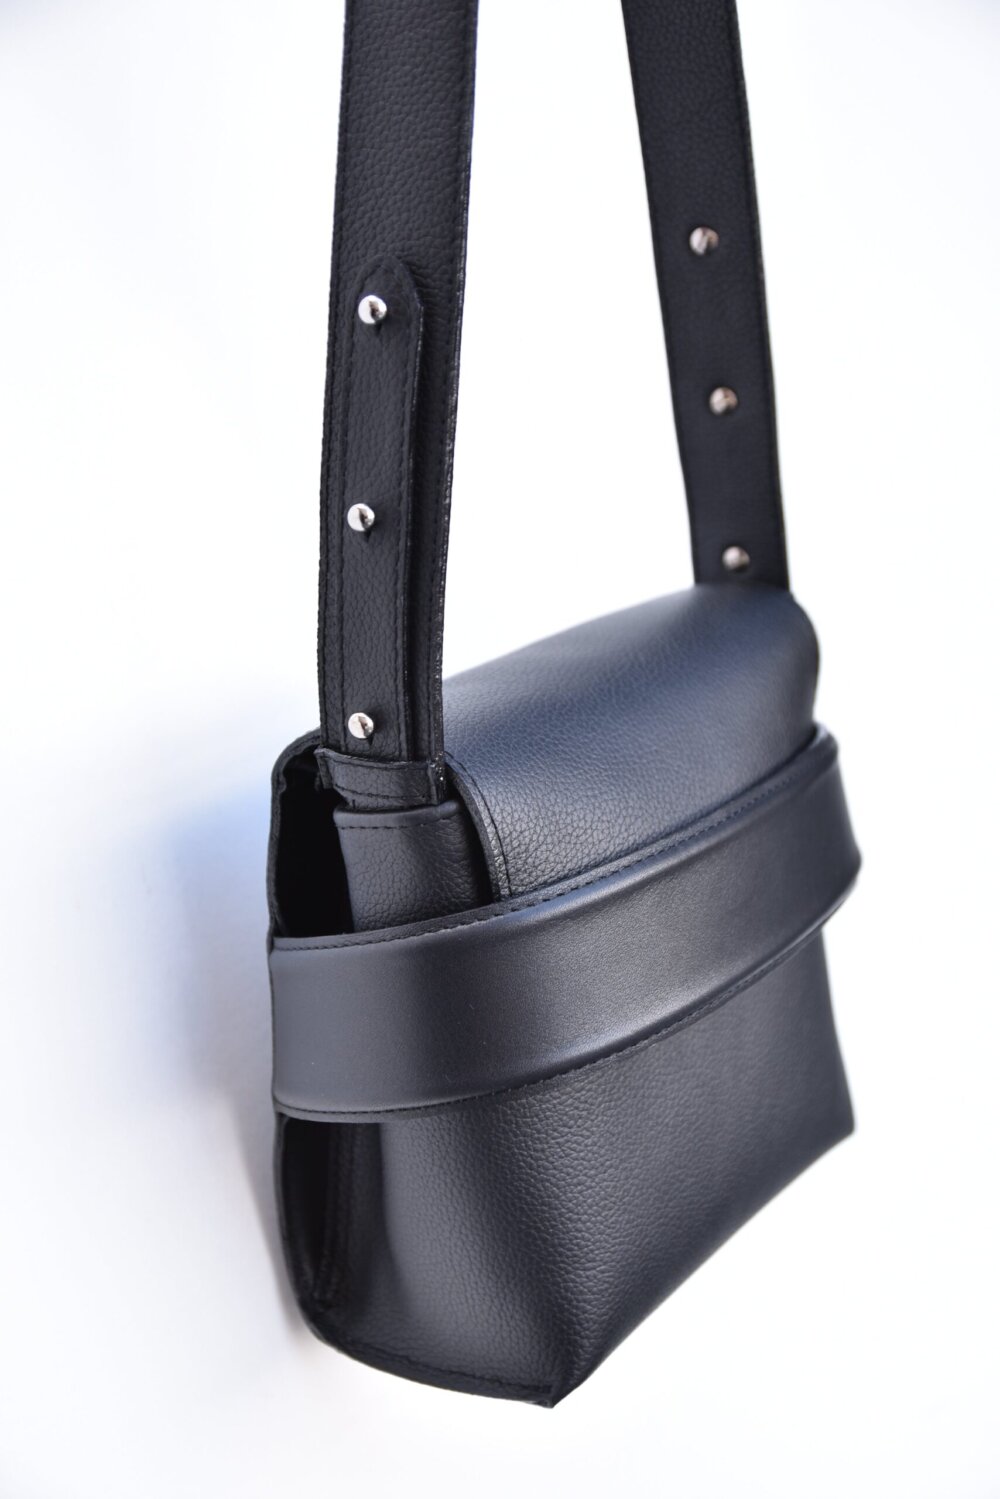 A black leather Shoulder bag Luce with straps hanging on a white background.